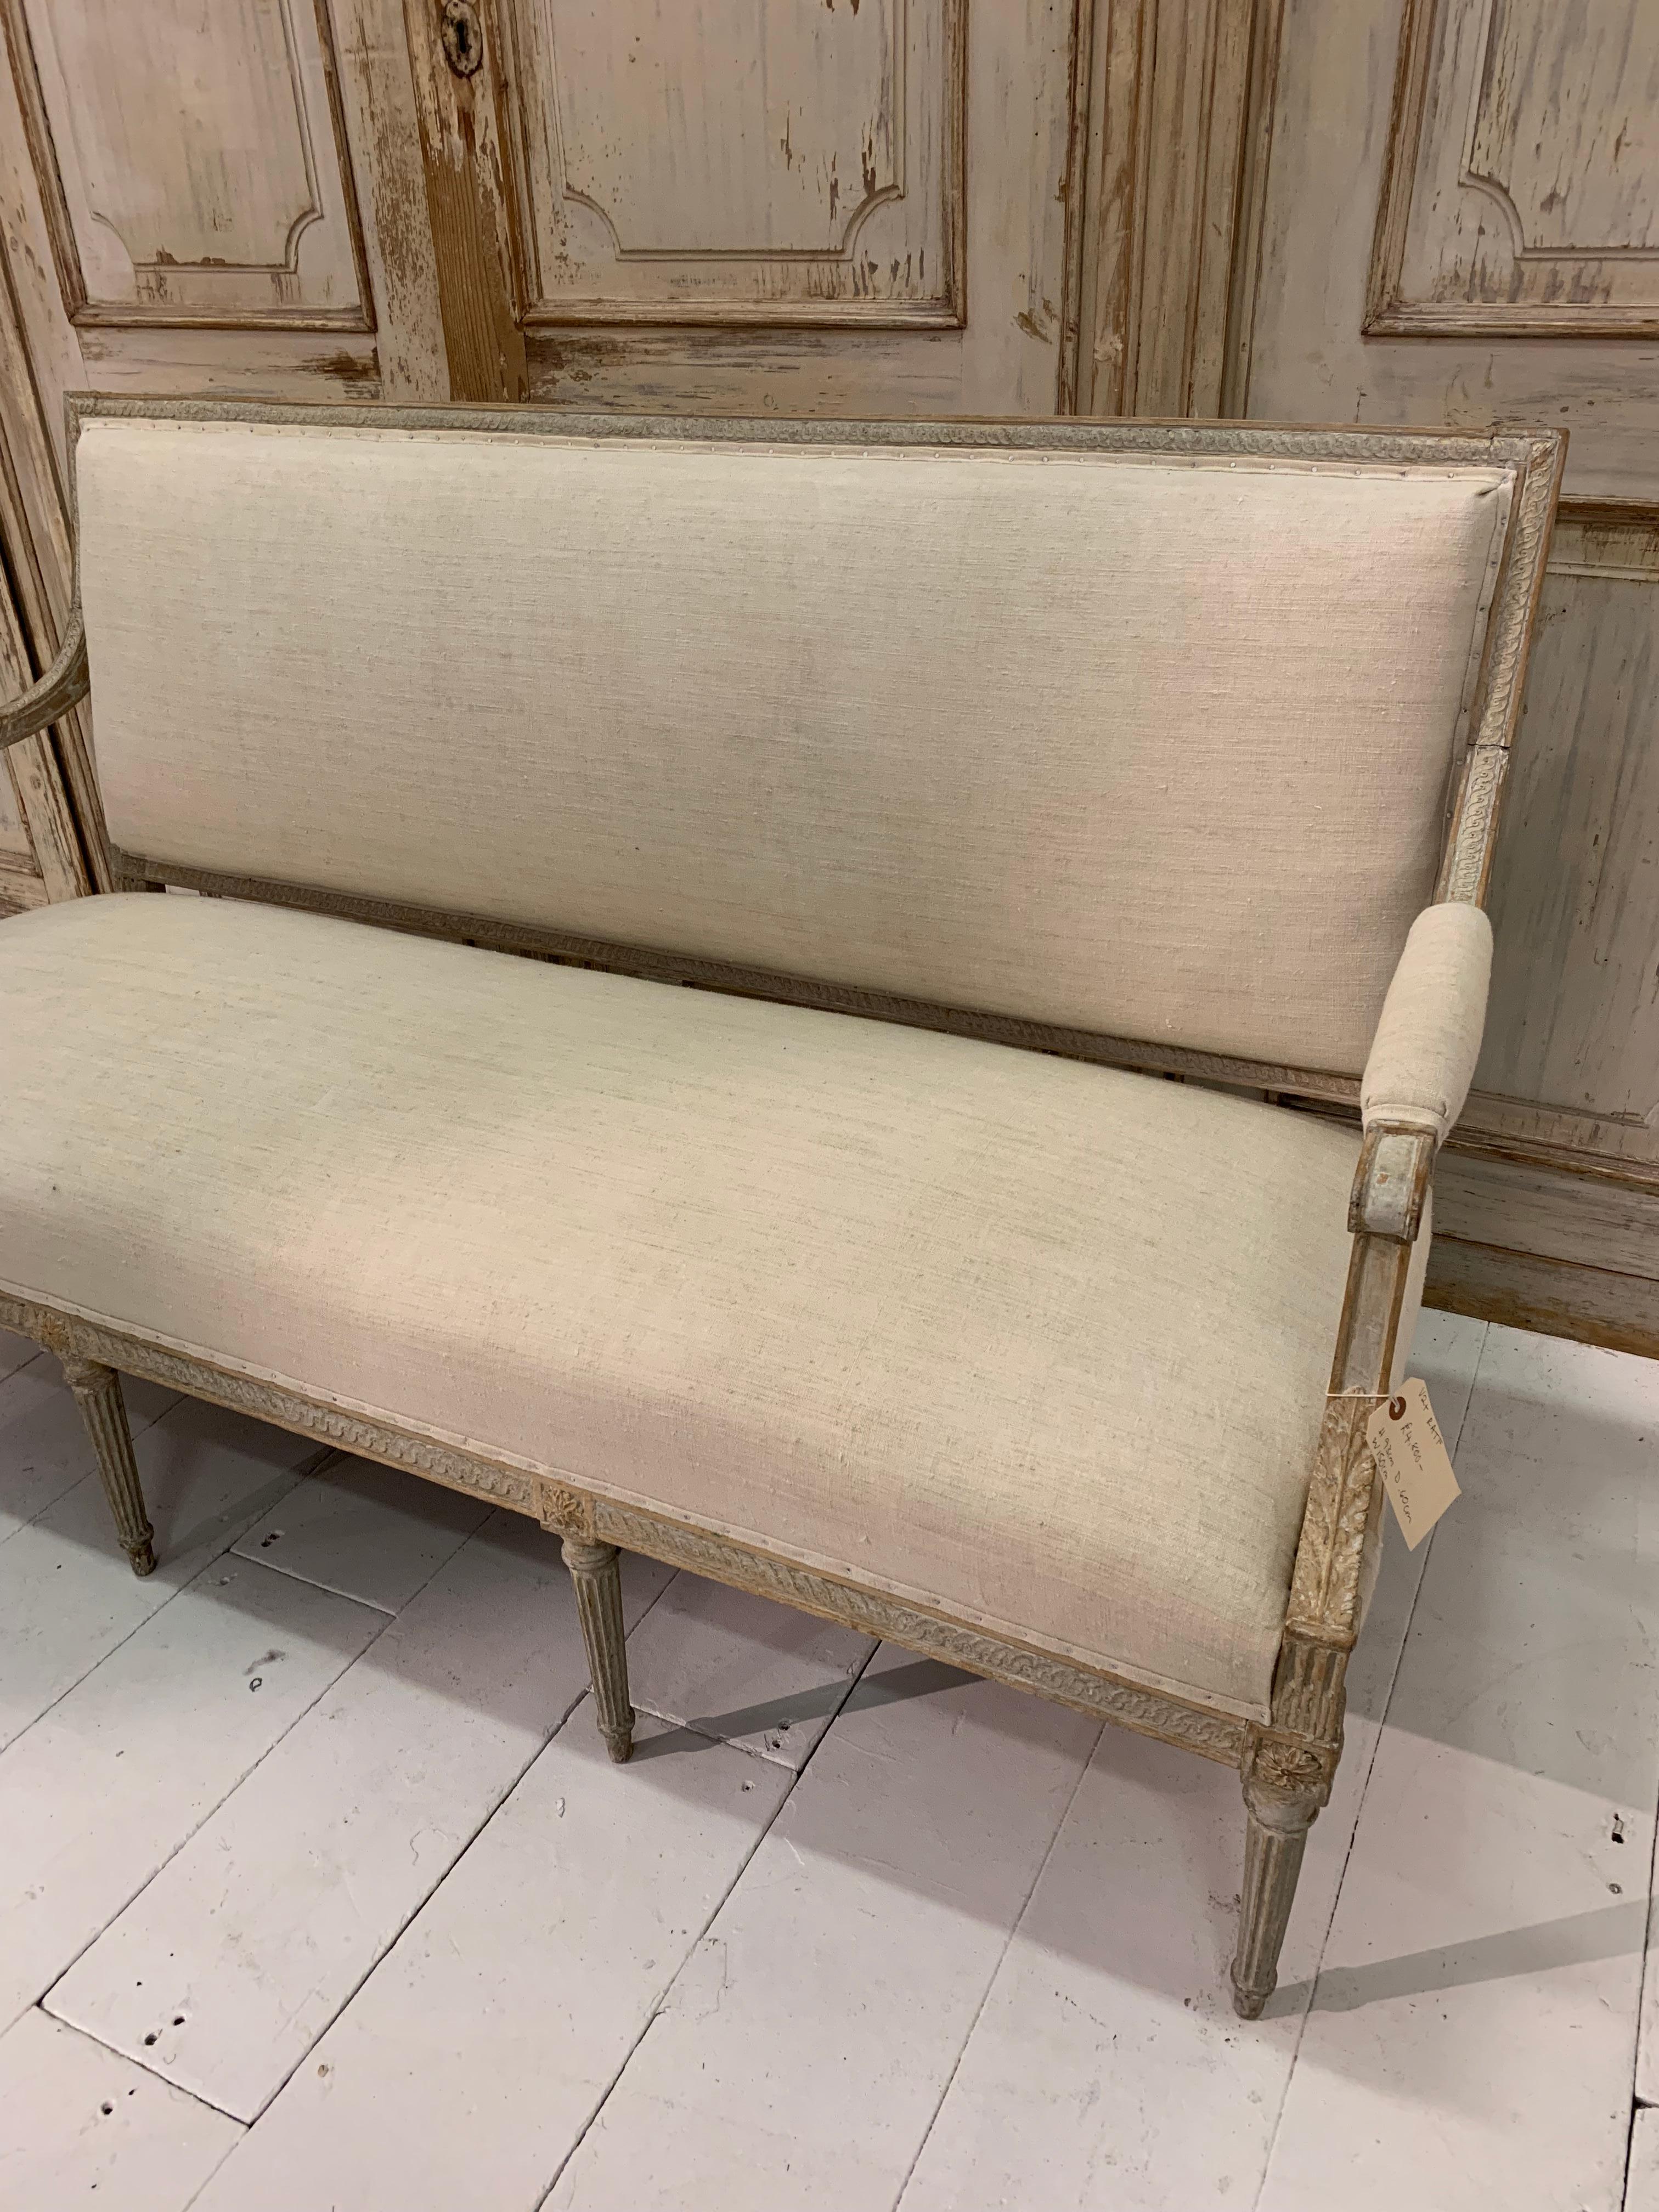 Hand-Carved 18th Century Swedish Gustavian Sofa Original Paint in Vintage French Linen